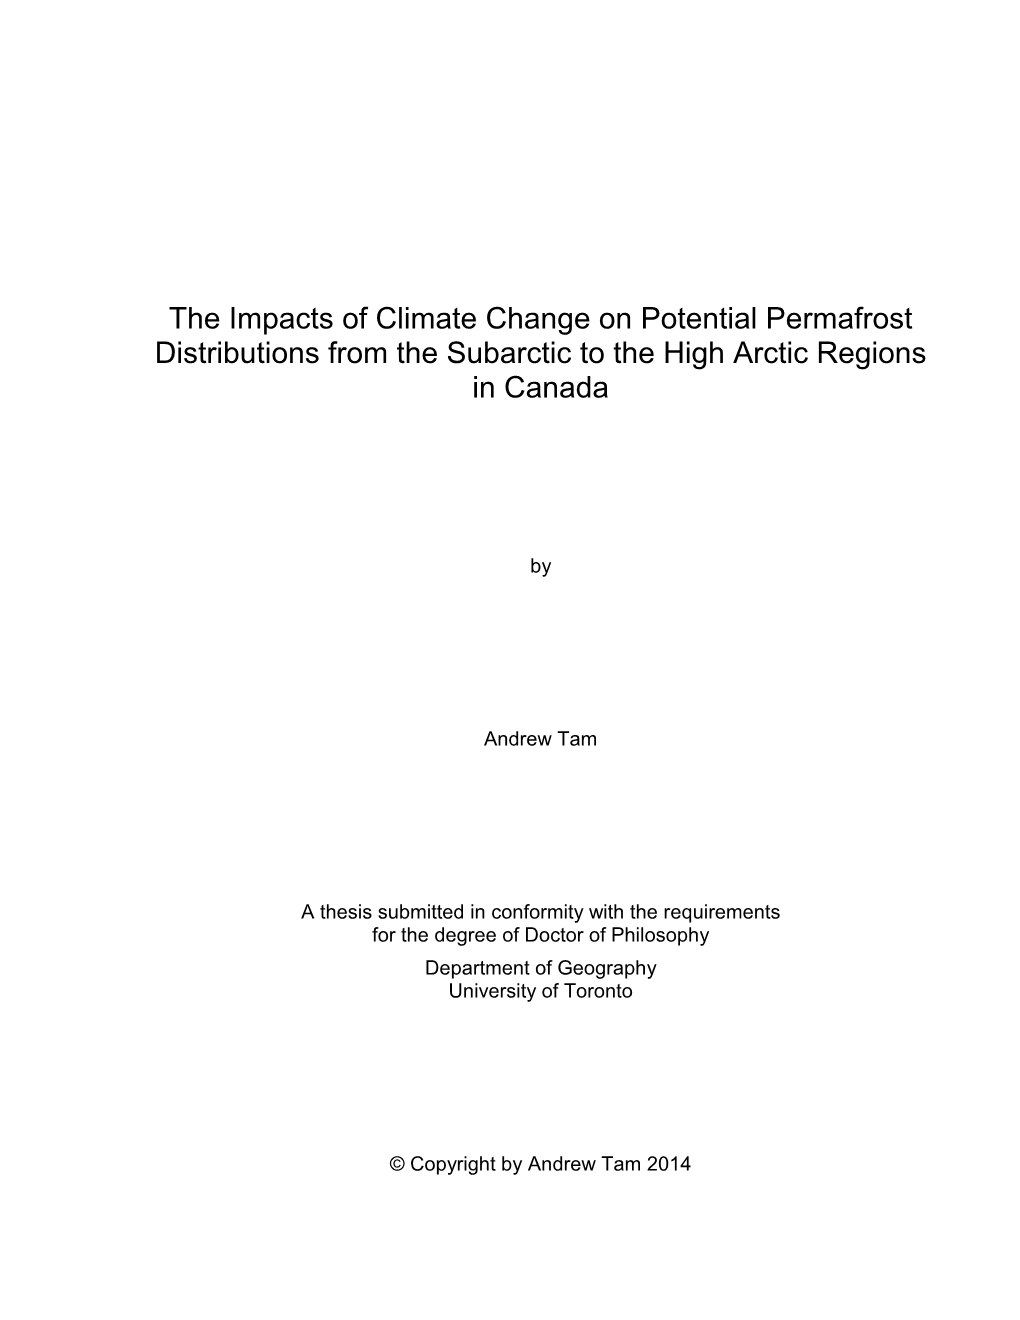 The Impacts of Climate Change on Potential Permafrost Distributions from the Subarctic to the High Arctic Regions in Canada